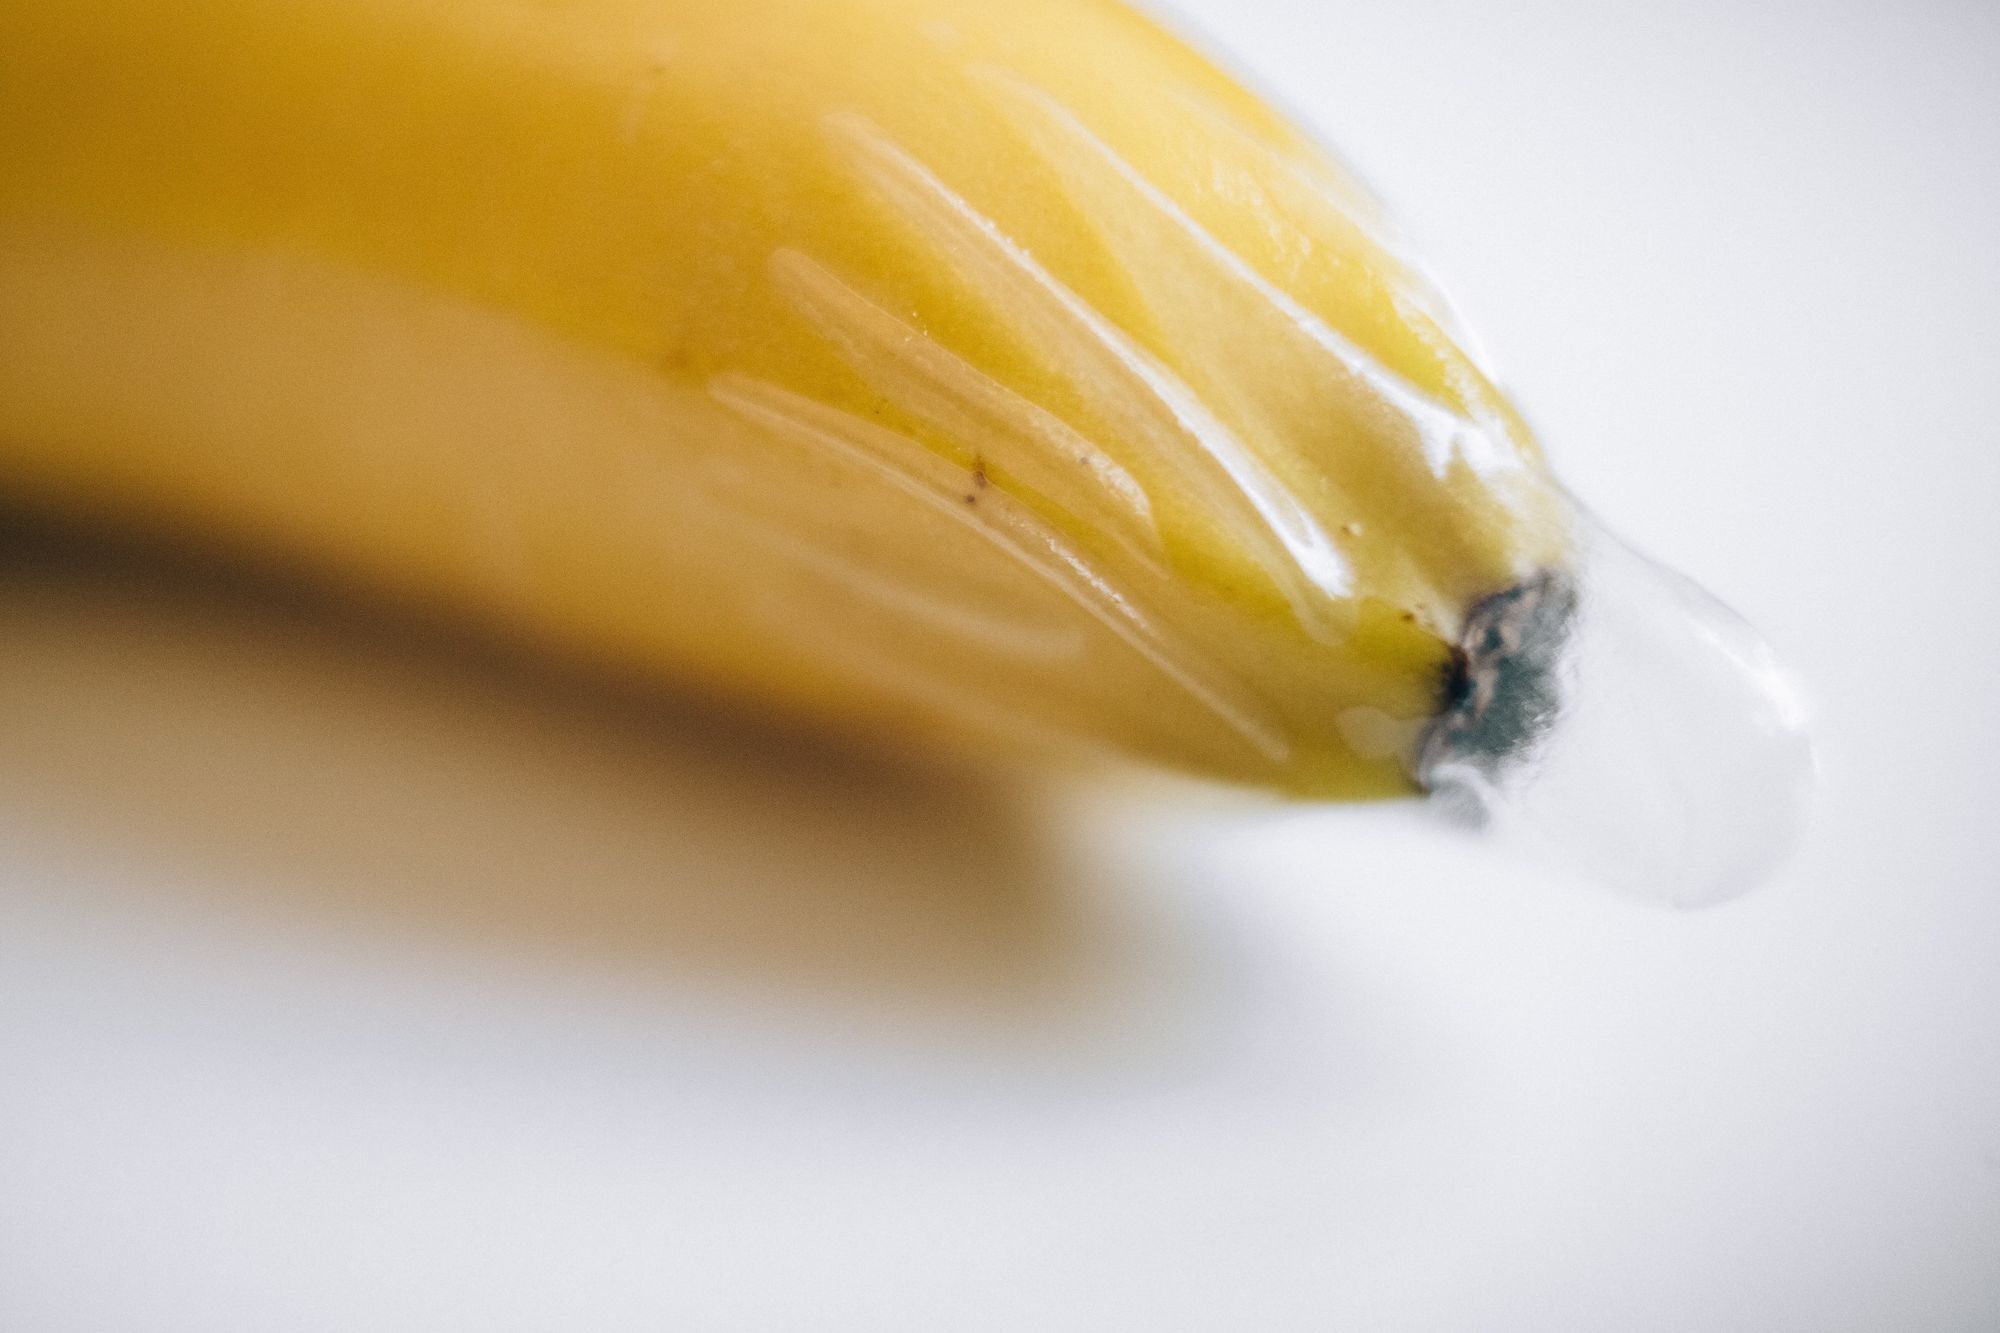 Image of a banana with condom